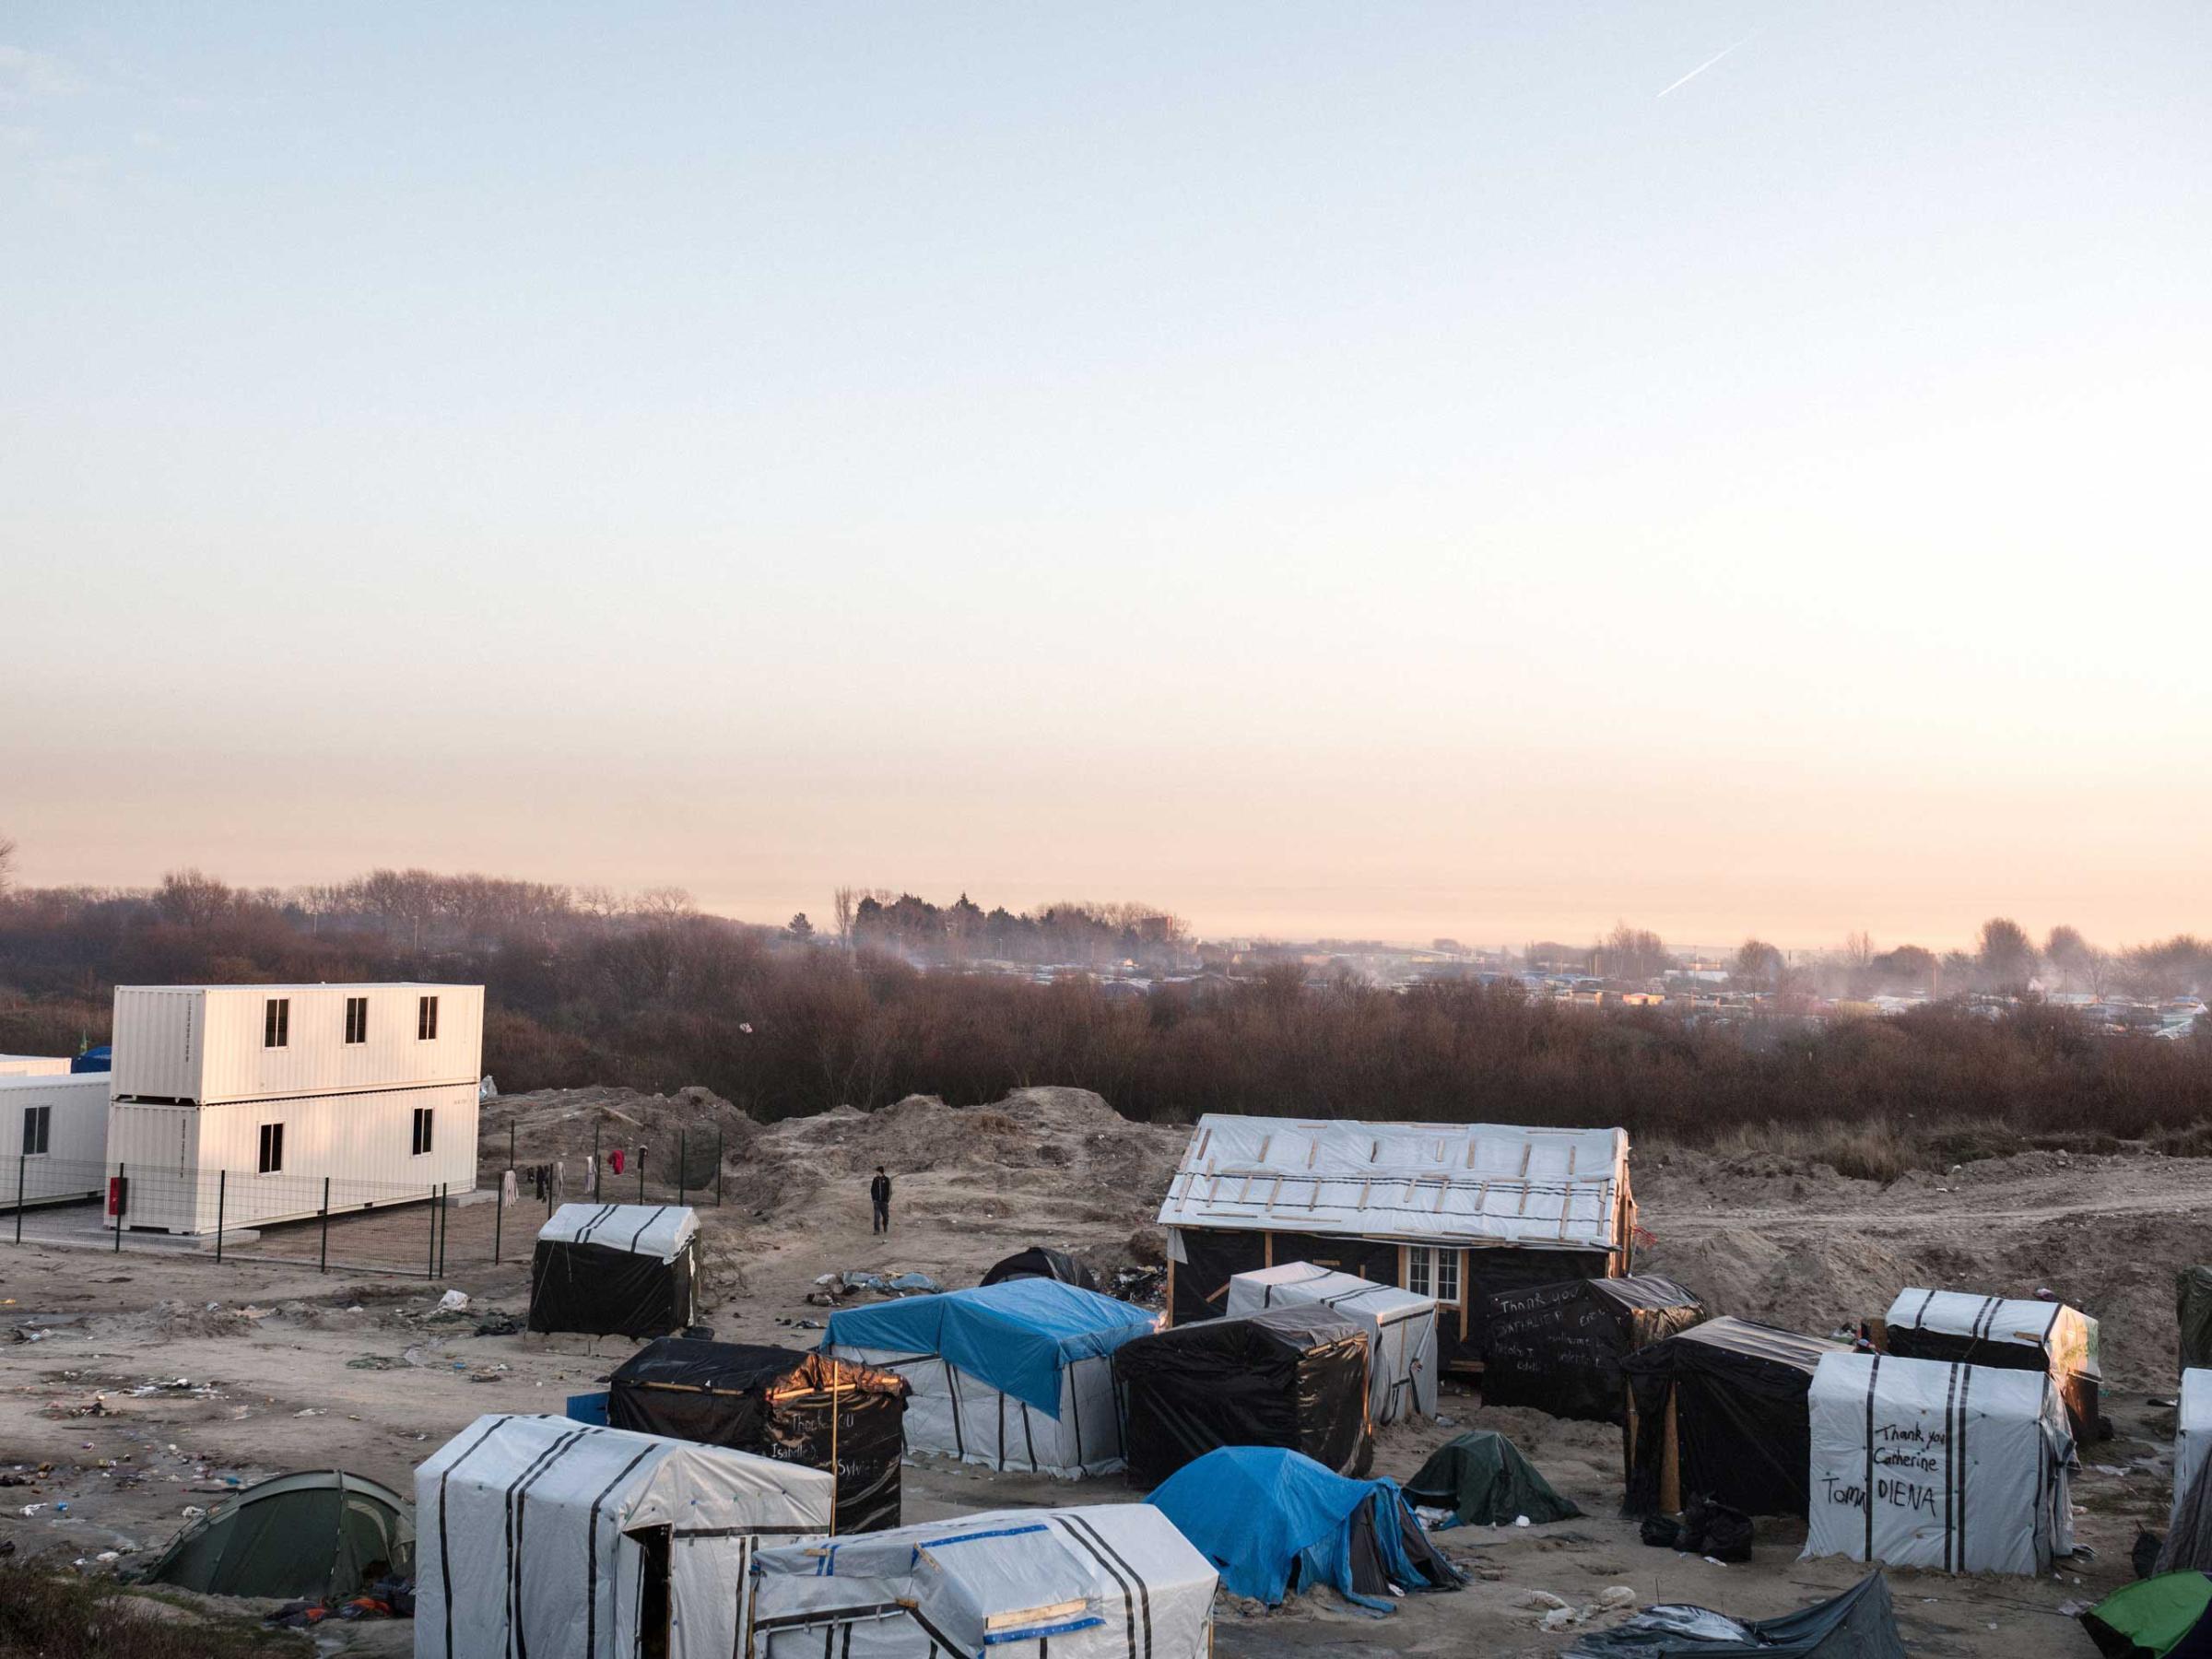 New construction  for migrants has begun in Calais, France intended to take the place of the "jungle" tent dwellings, Jan. 19, 2016.